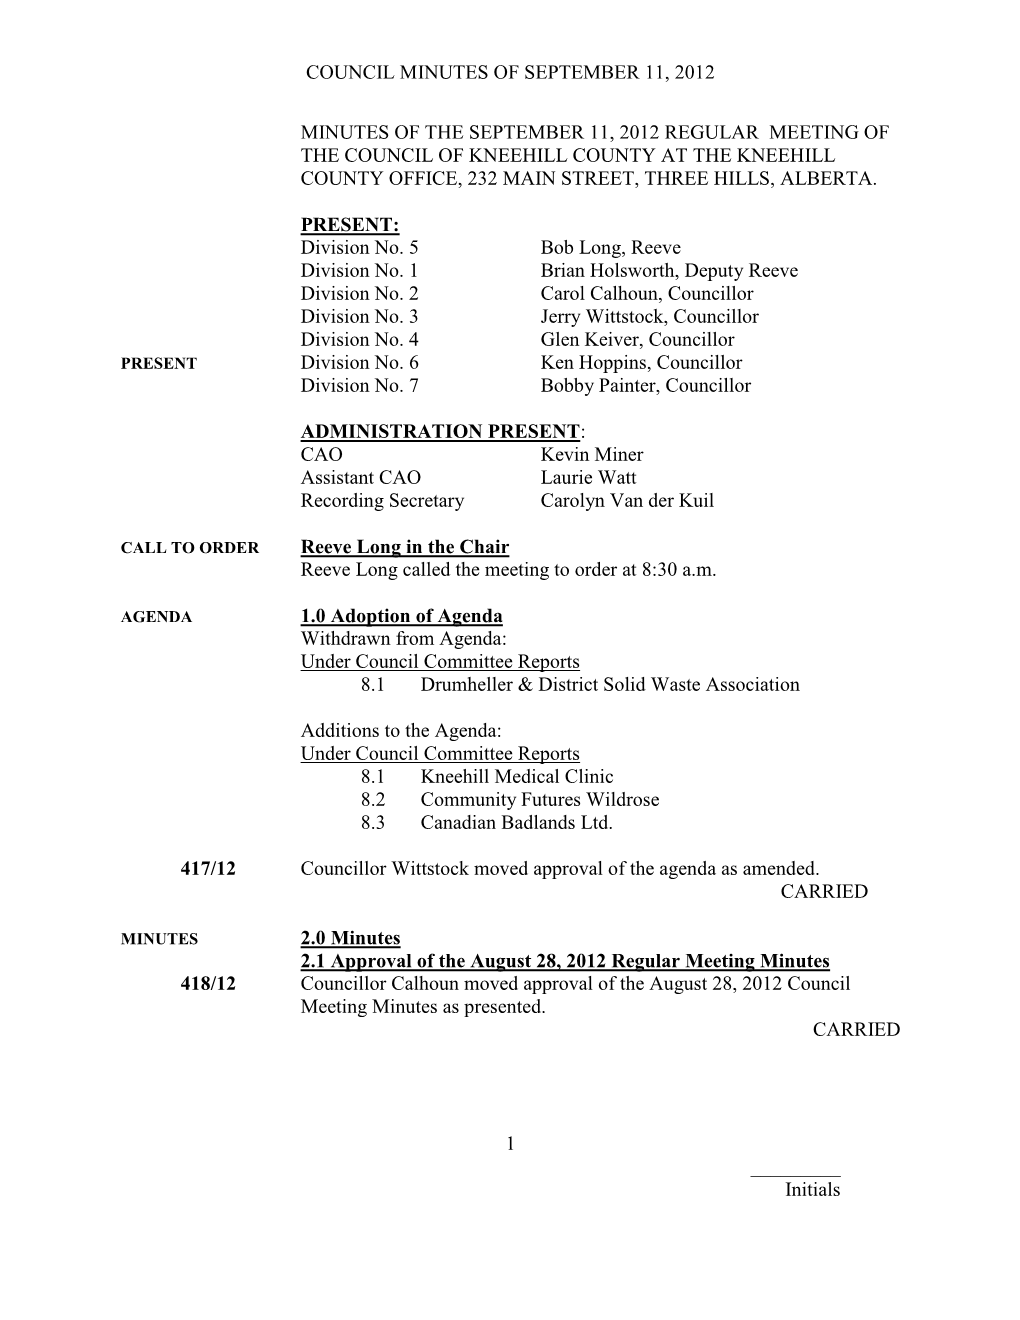 Council Minutes of September 11, 2012 1